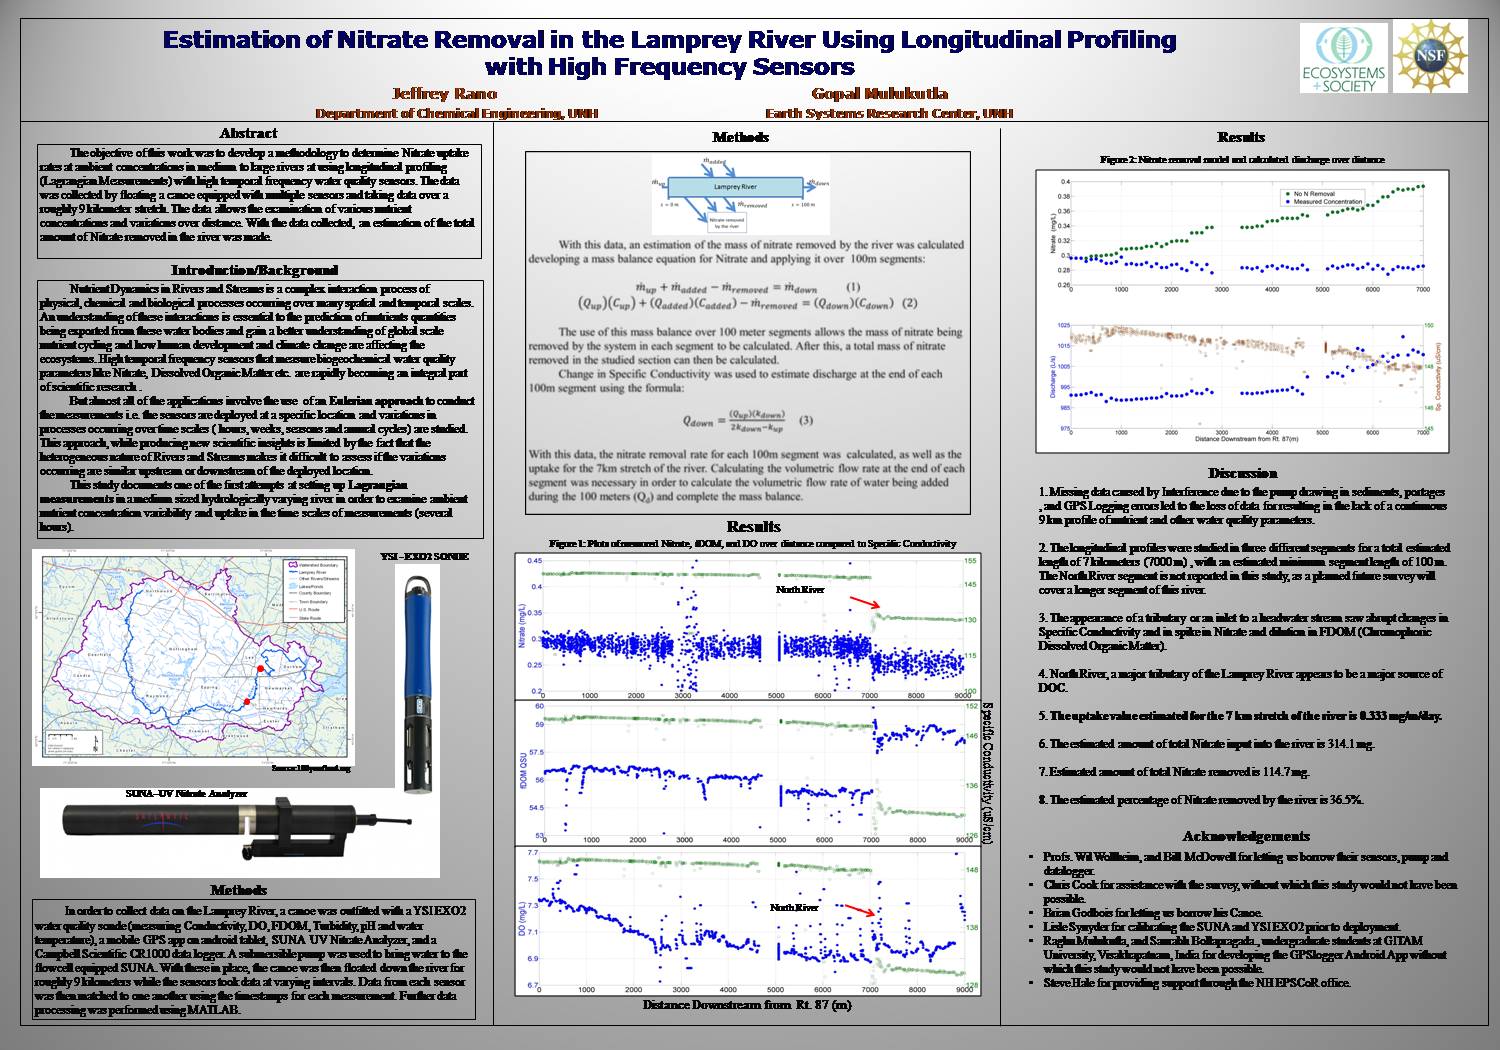 Estimation Of Nitrate Removal In The Lamprey River Using Longitudinal Profiling  by srhale